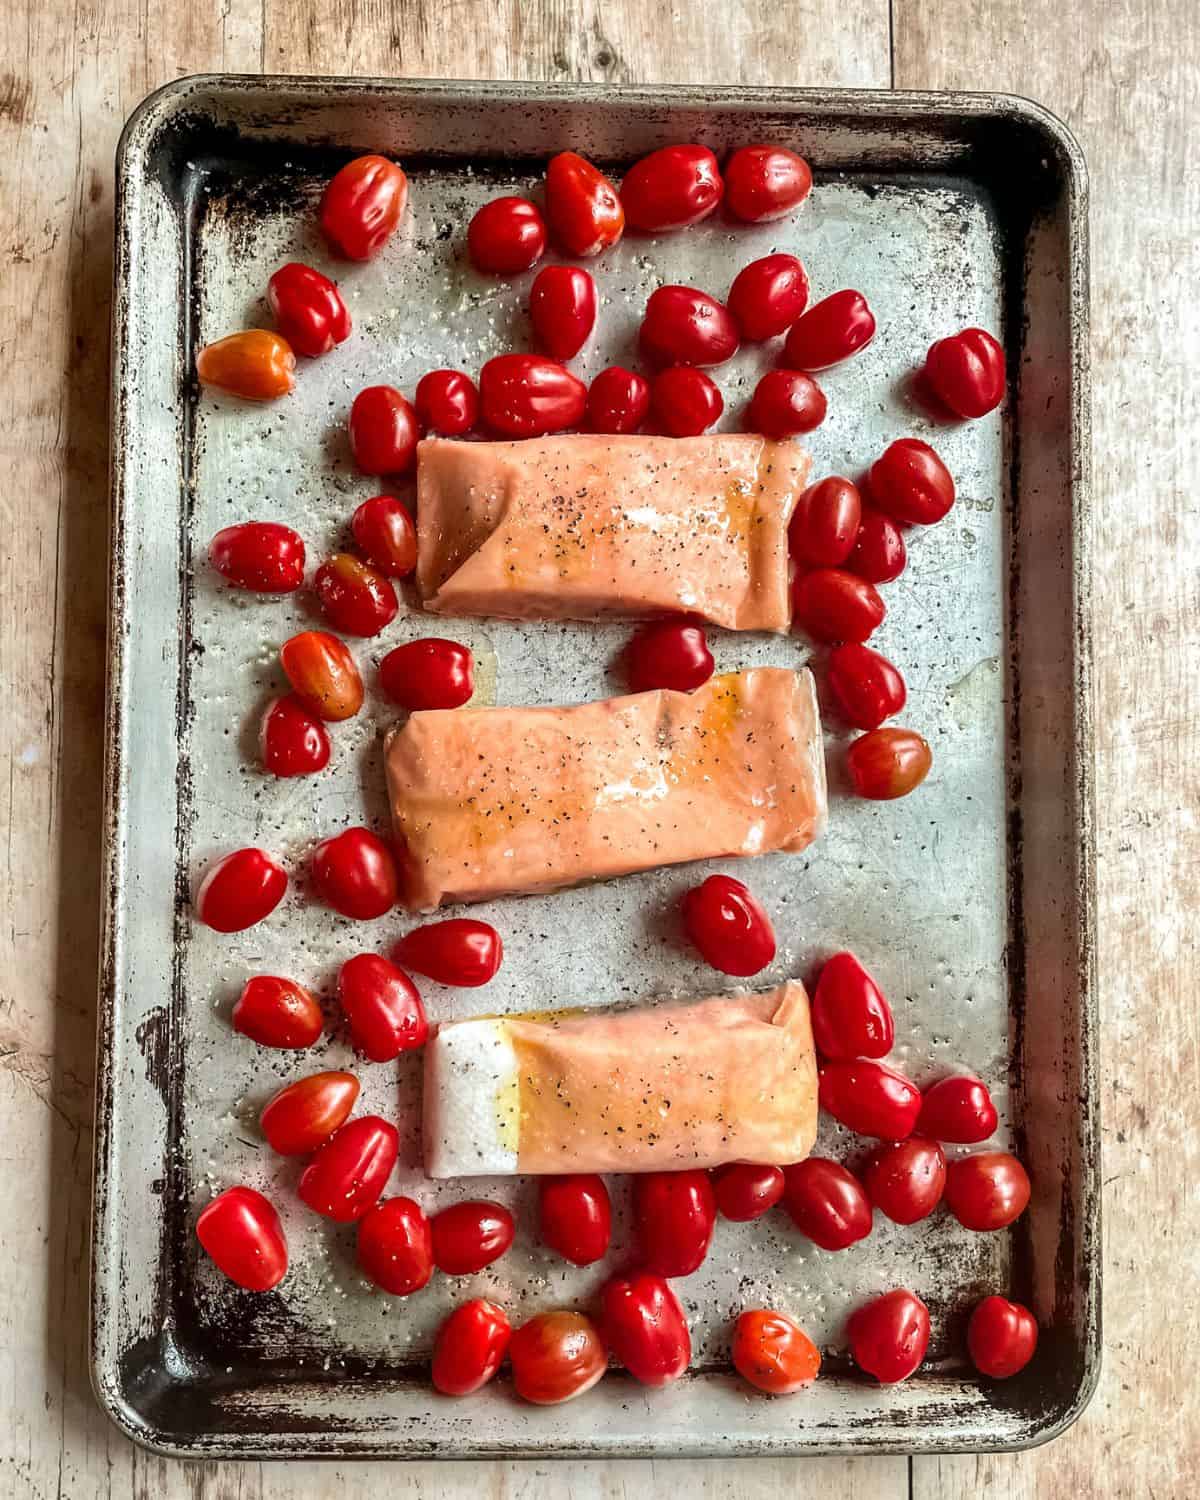 Frozen salmon and cherry tomatoes on a baking sheet, ready to go in the oven.